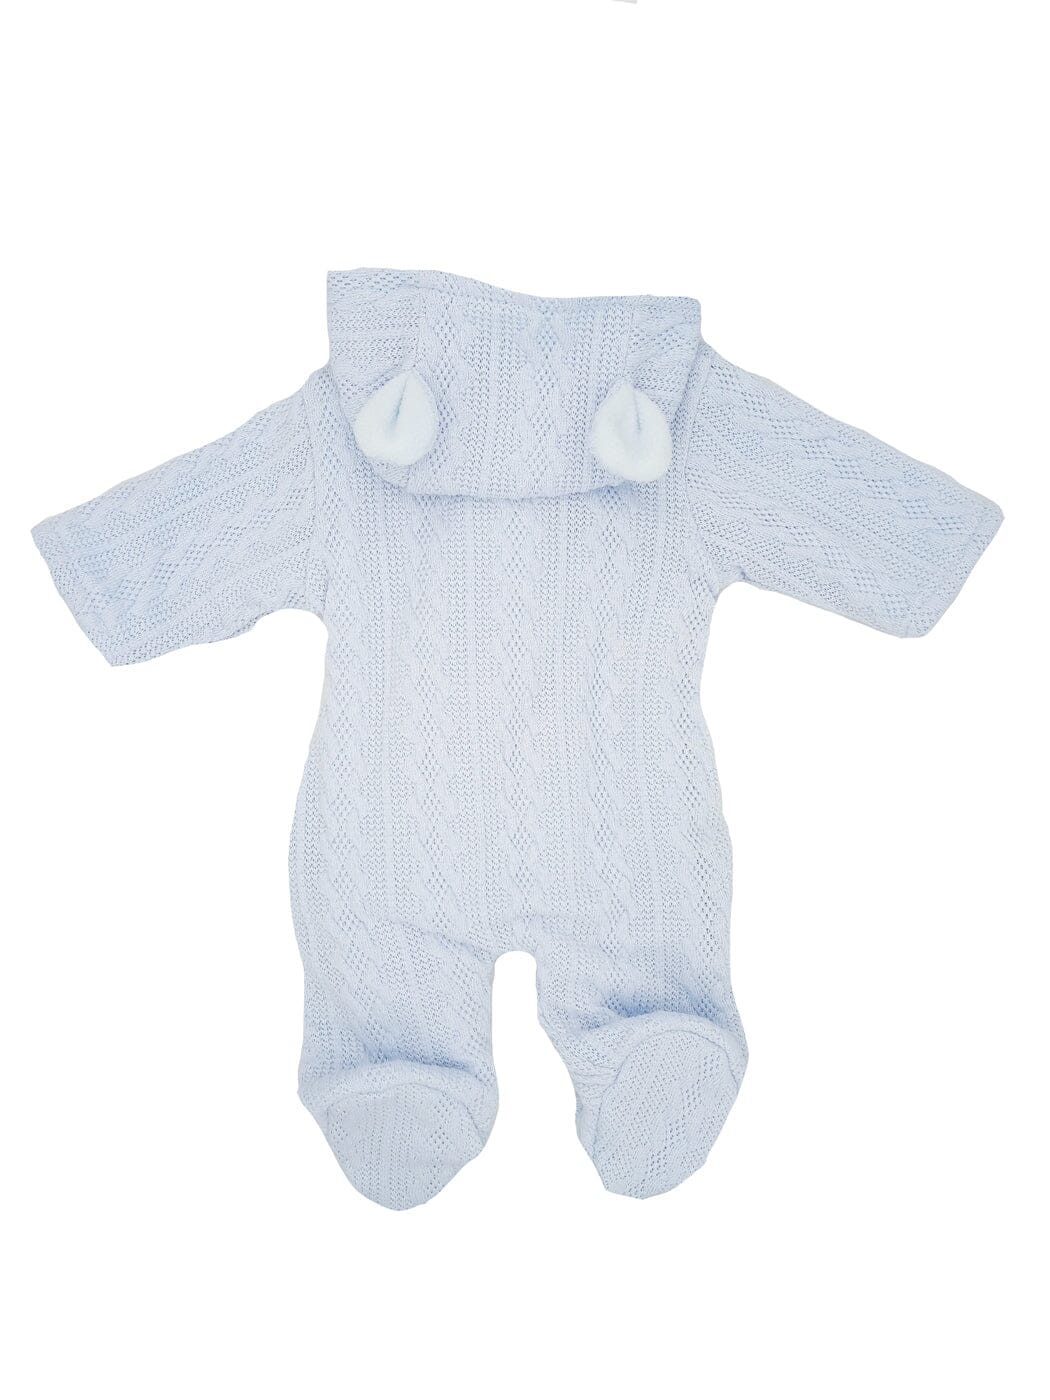 Tiny Baby Pramsuit With Bunny Ears - Blue, Knitted - Snowsuit / Pramsuit - Tiny Baby